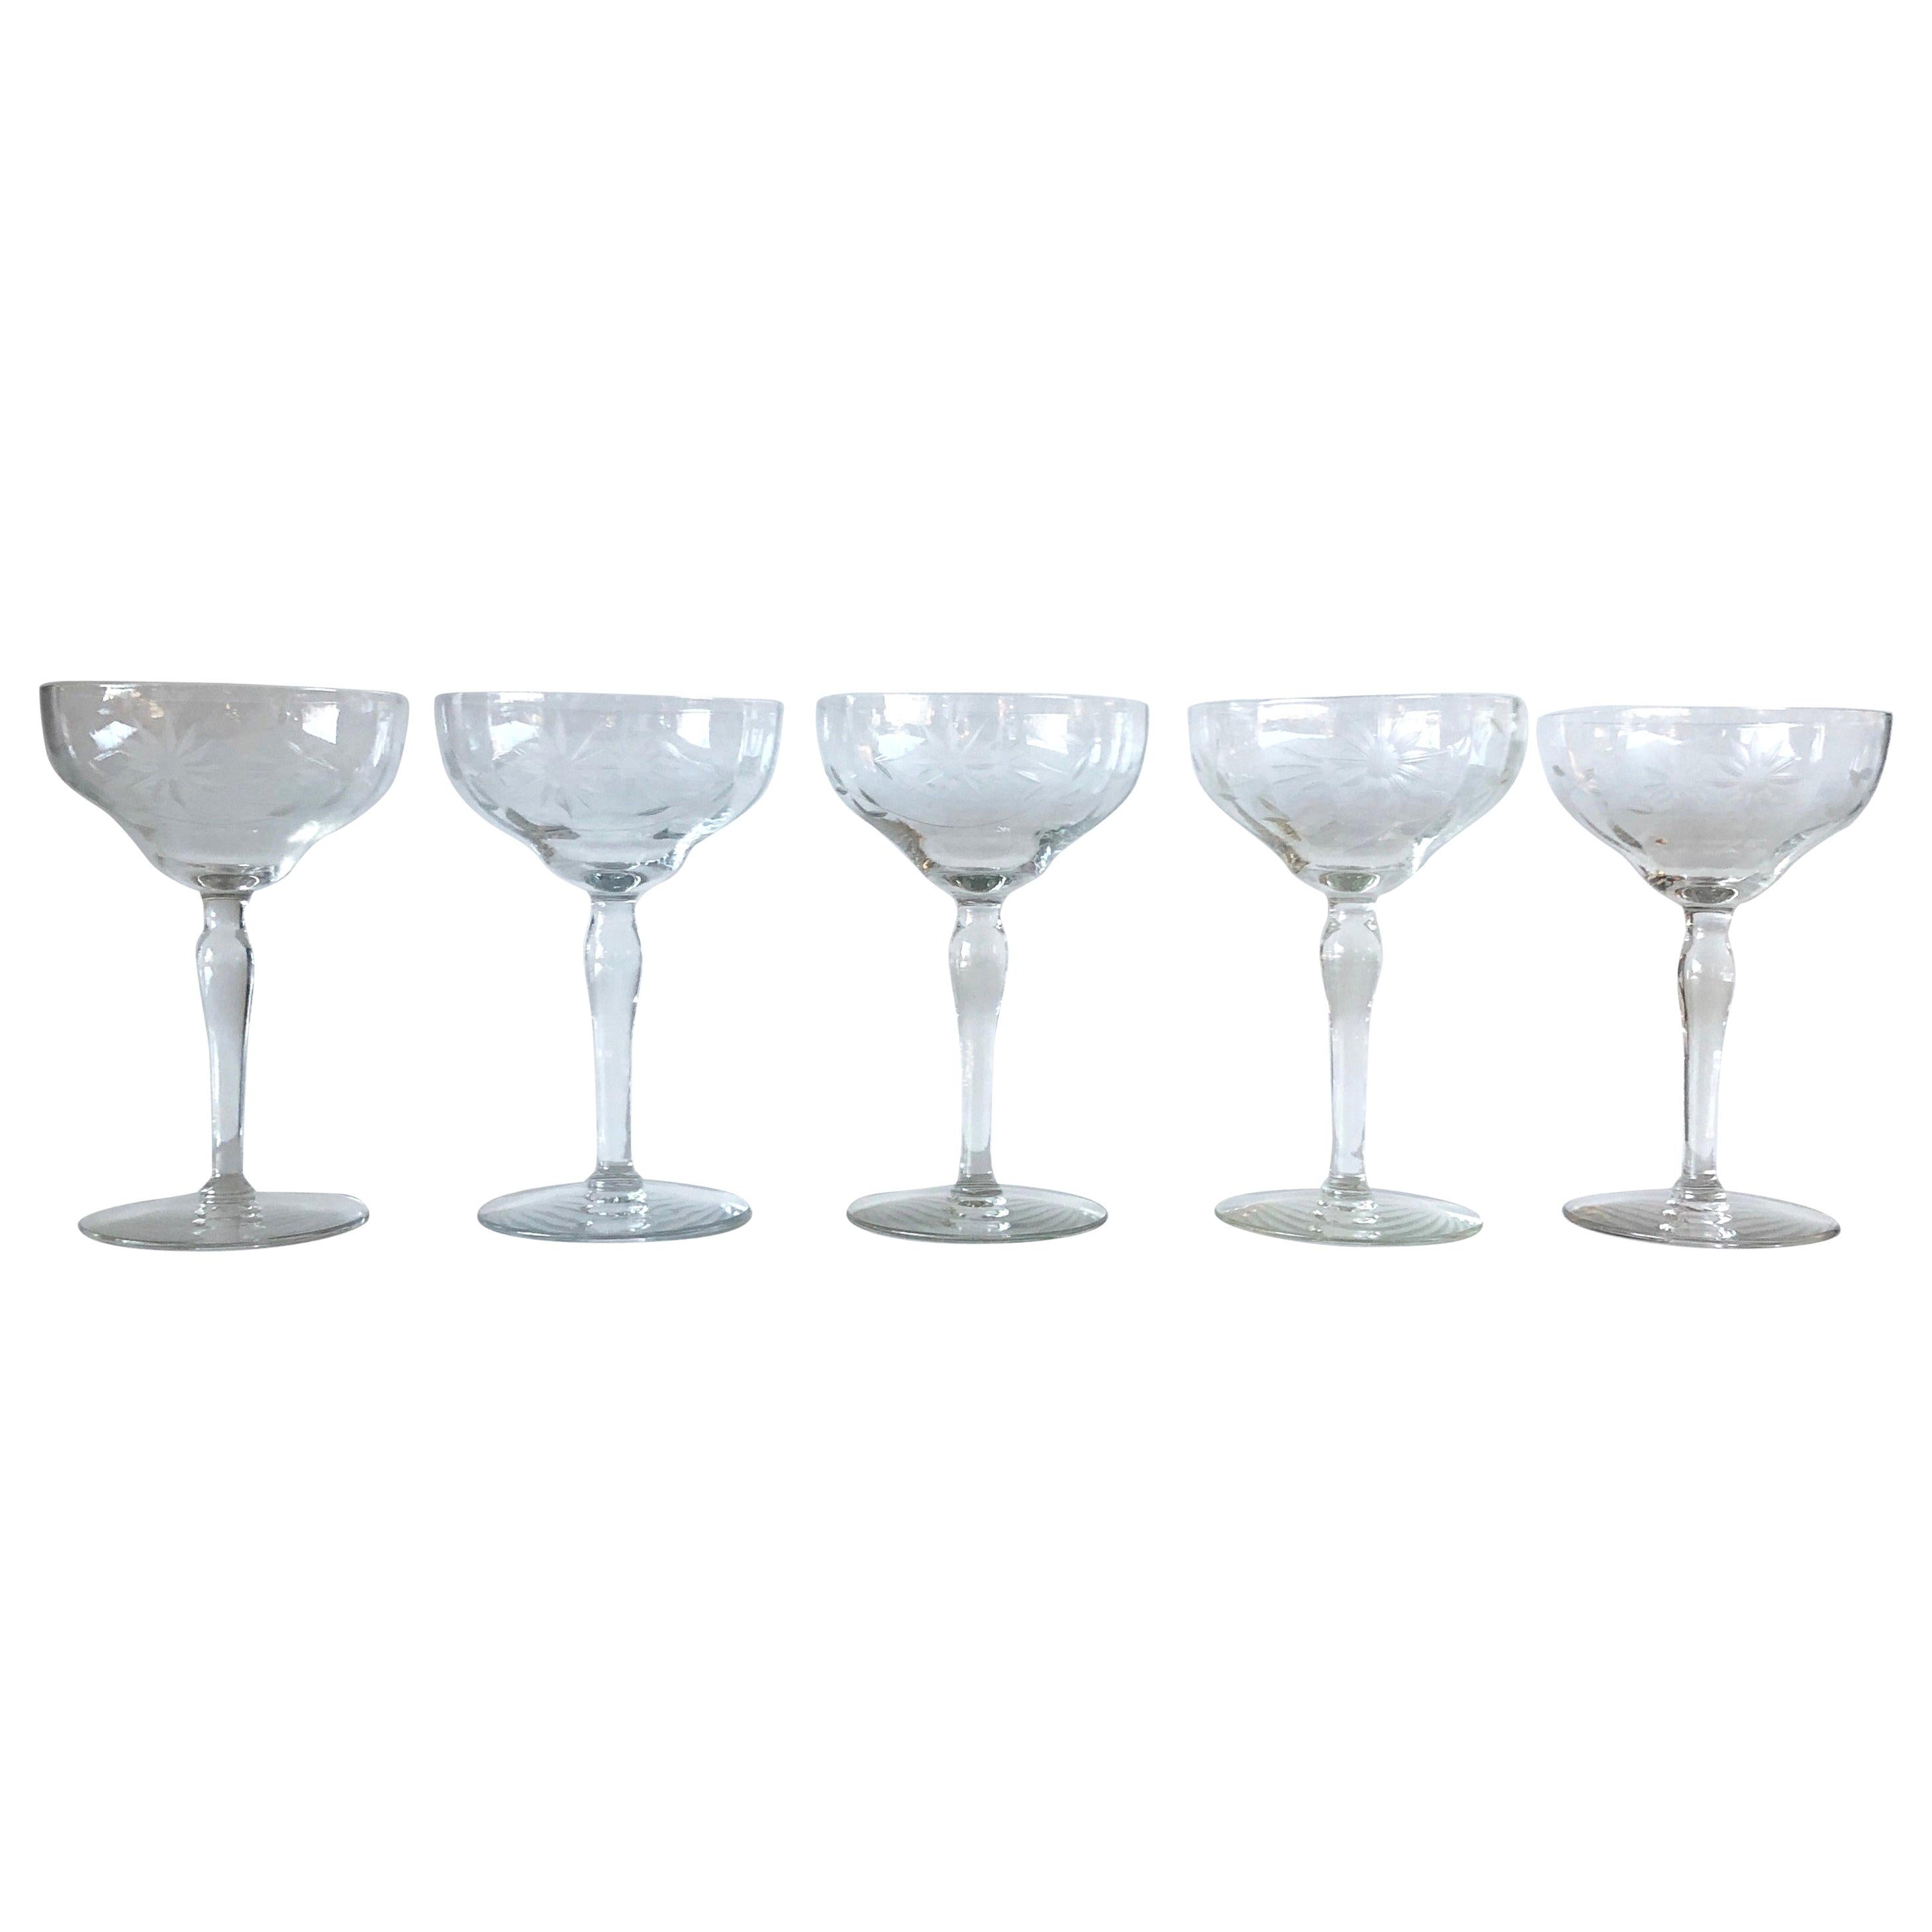 Set of 5 "Starburst" Pattern Cut Glass Champagne Coupes / Glasses at 1stDibs